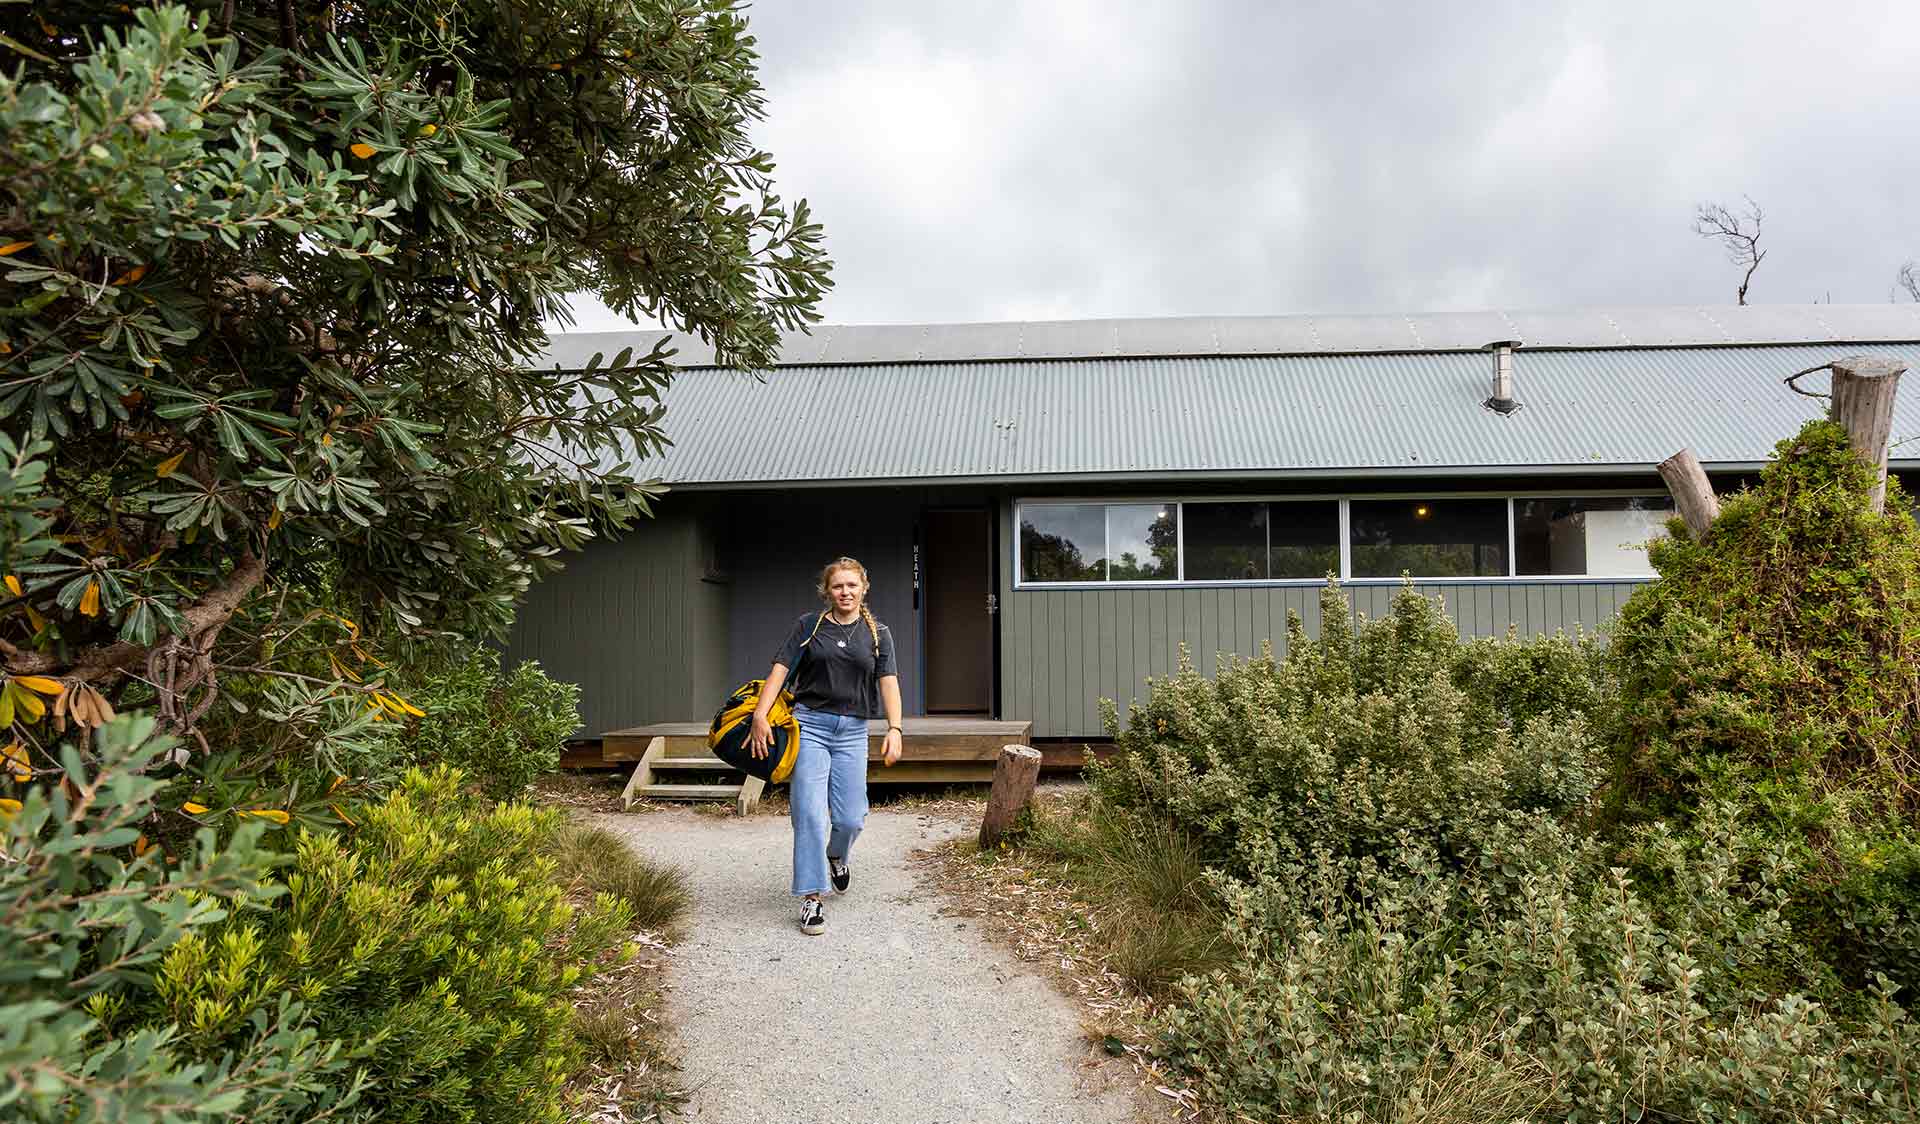 A woman carries a bag and walks away from the entrance to a cabin at Tidal River at Wilsons Promontory National Park